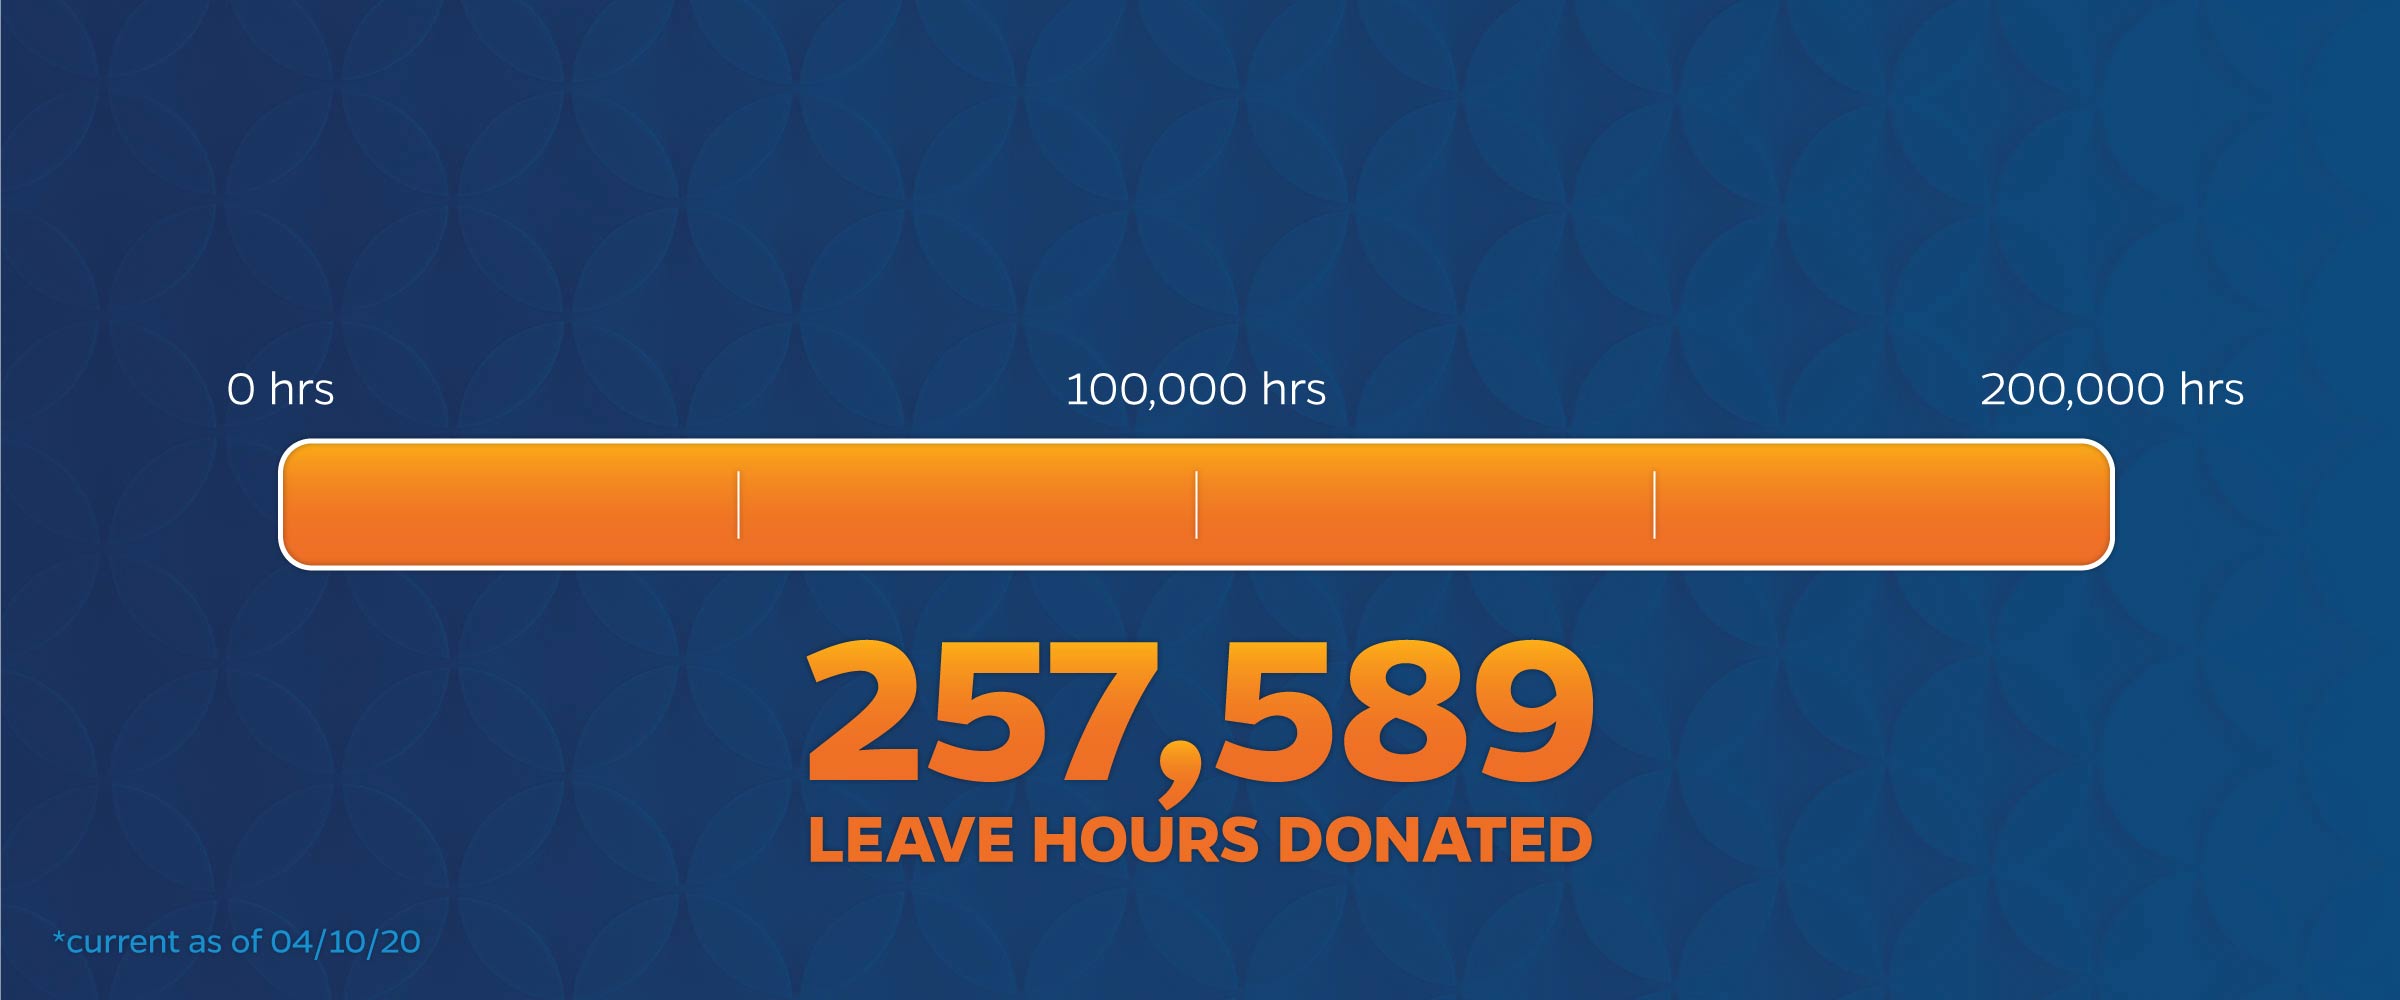 Leave Donations: 257,589 Hours! Thank you!